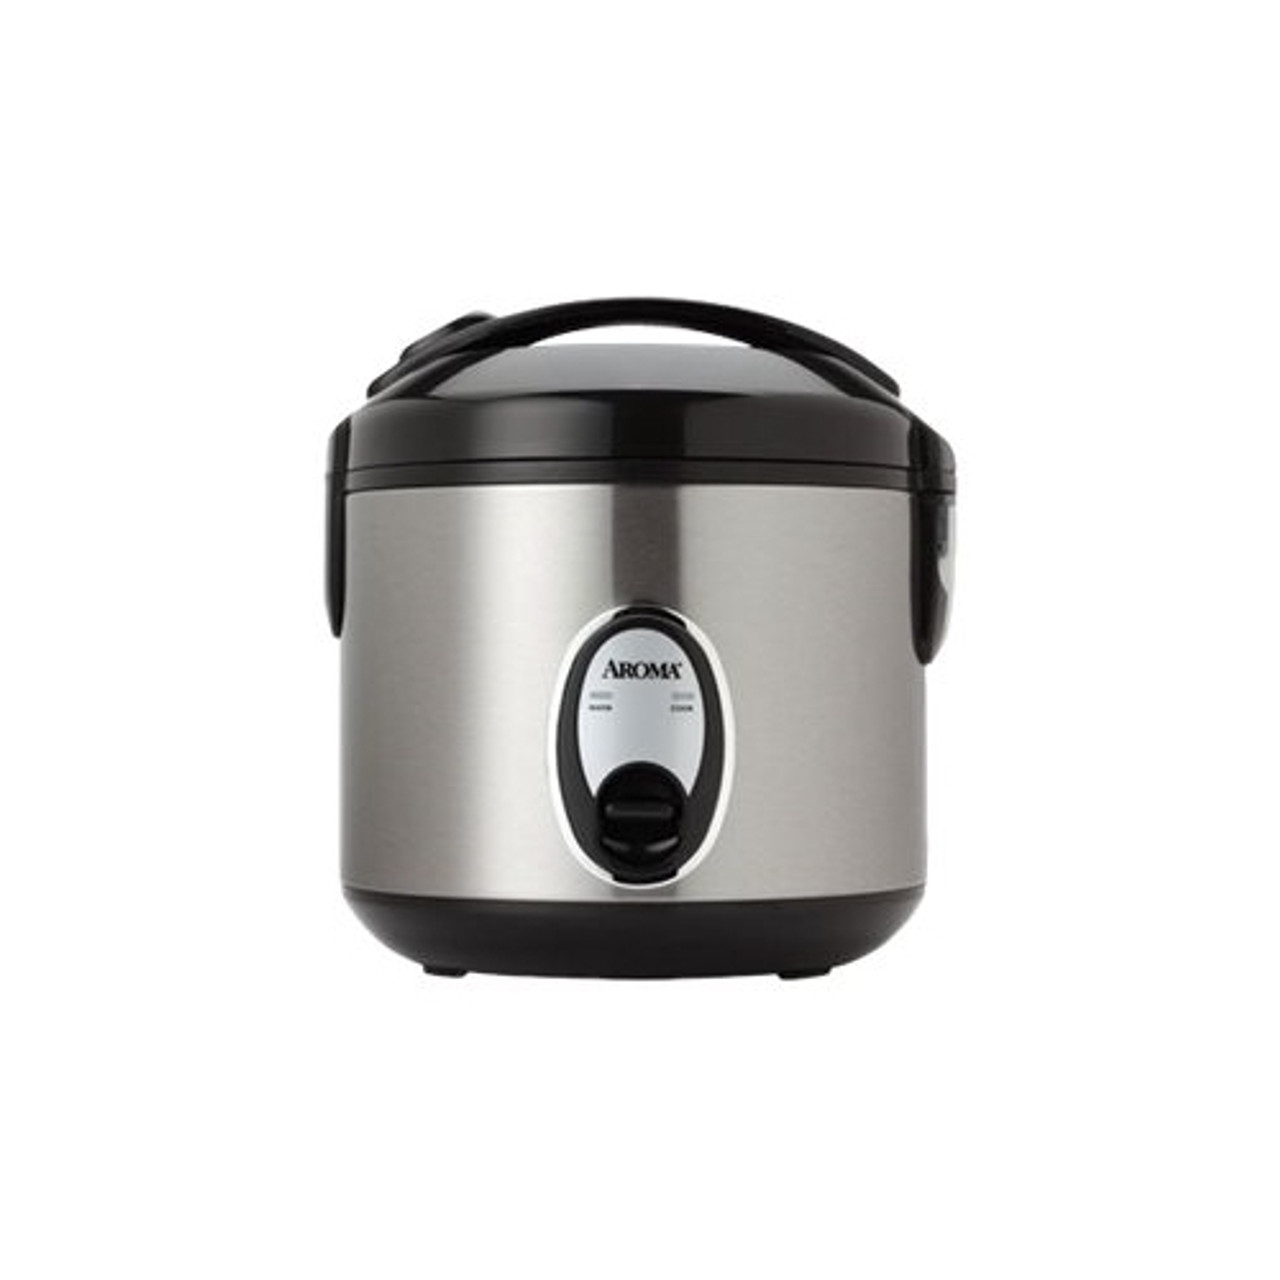 AROMA - 8-Cup Rice Cooker/Steamer - Black/silver